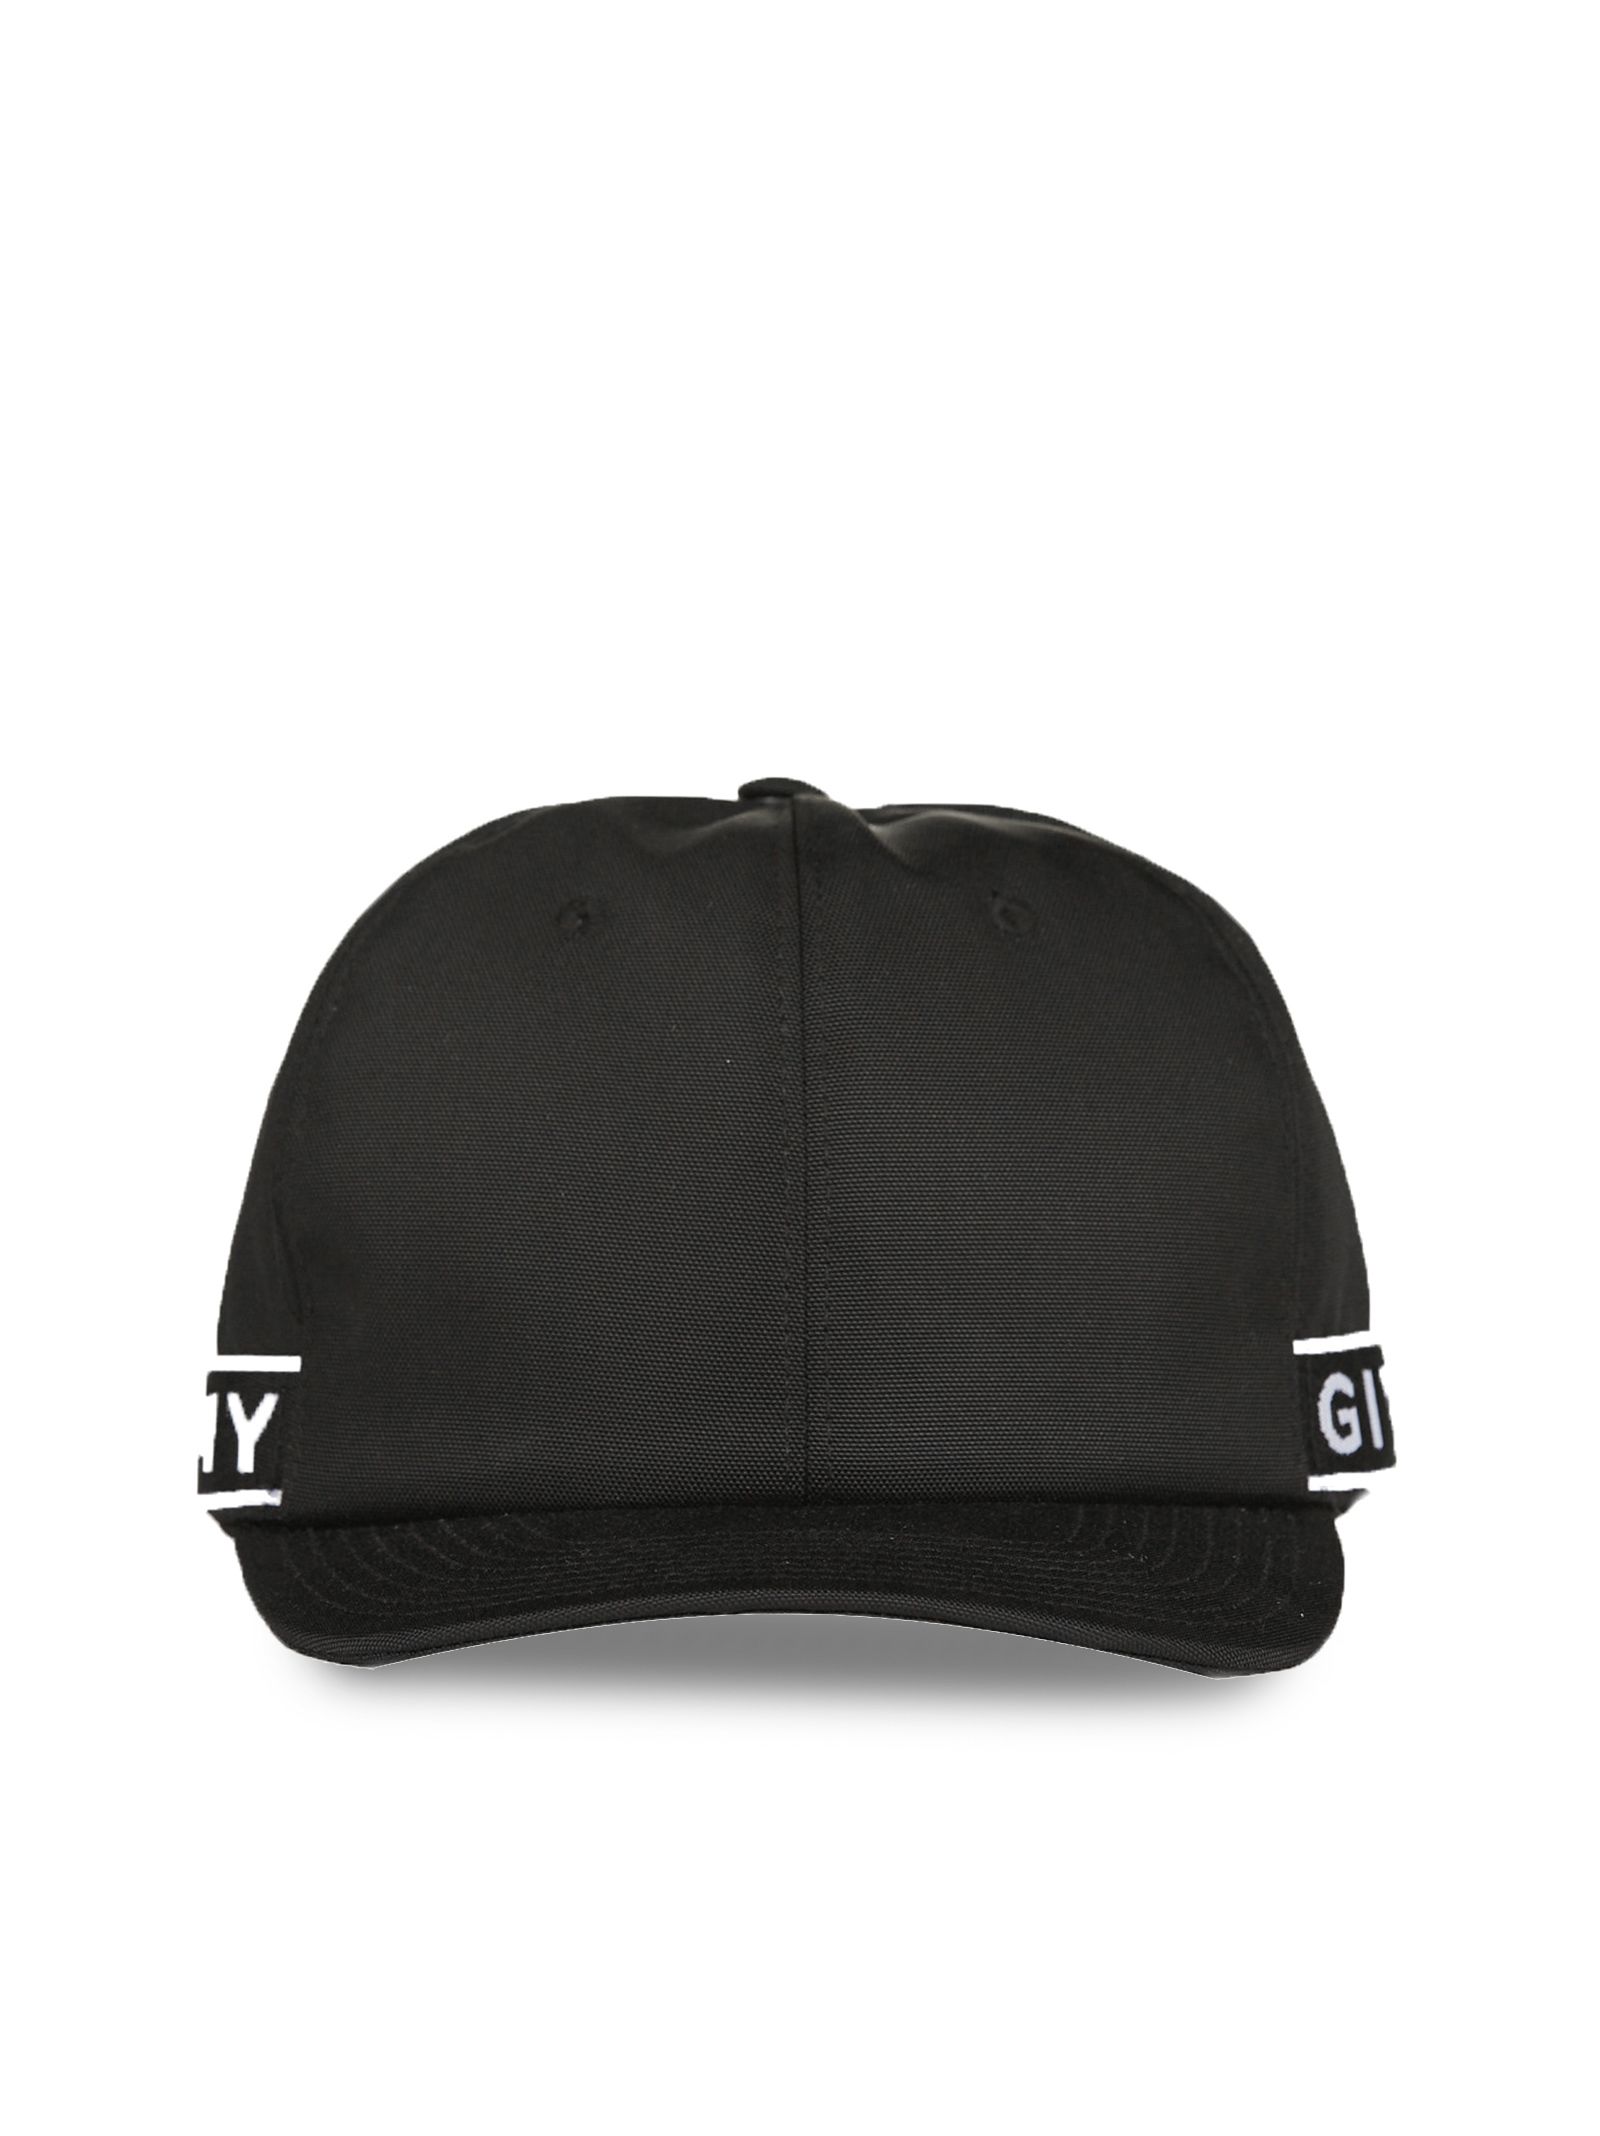 italist | Best price in the market for Givenchy Givenchy 4g Cap - Nero ...